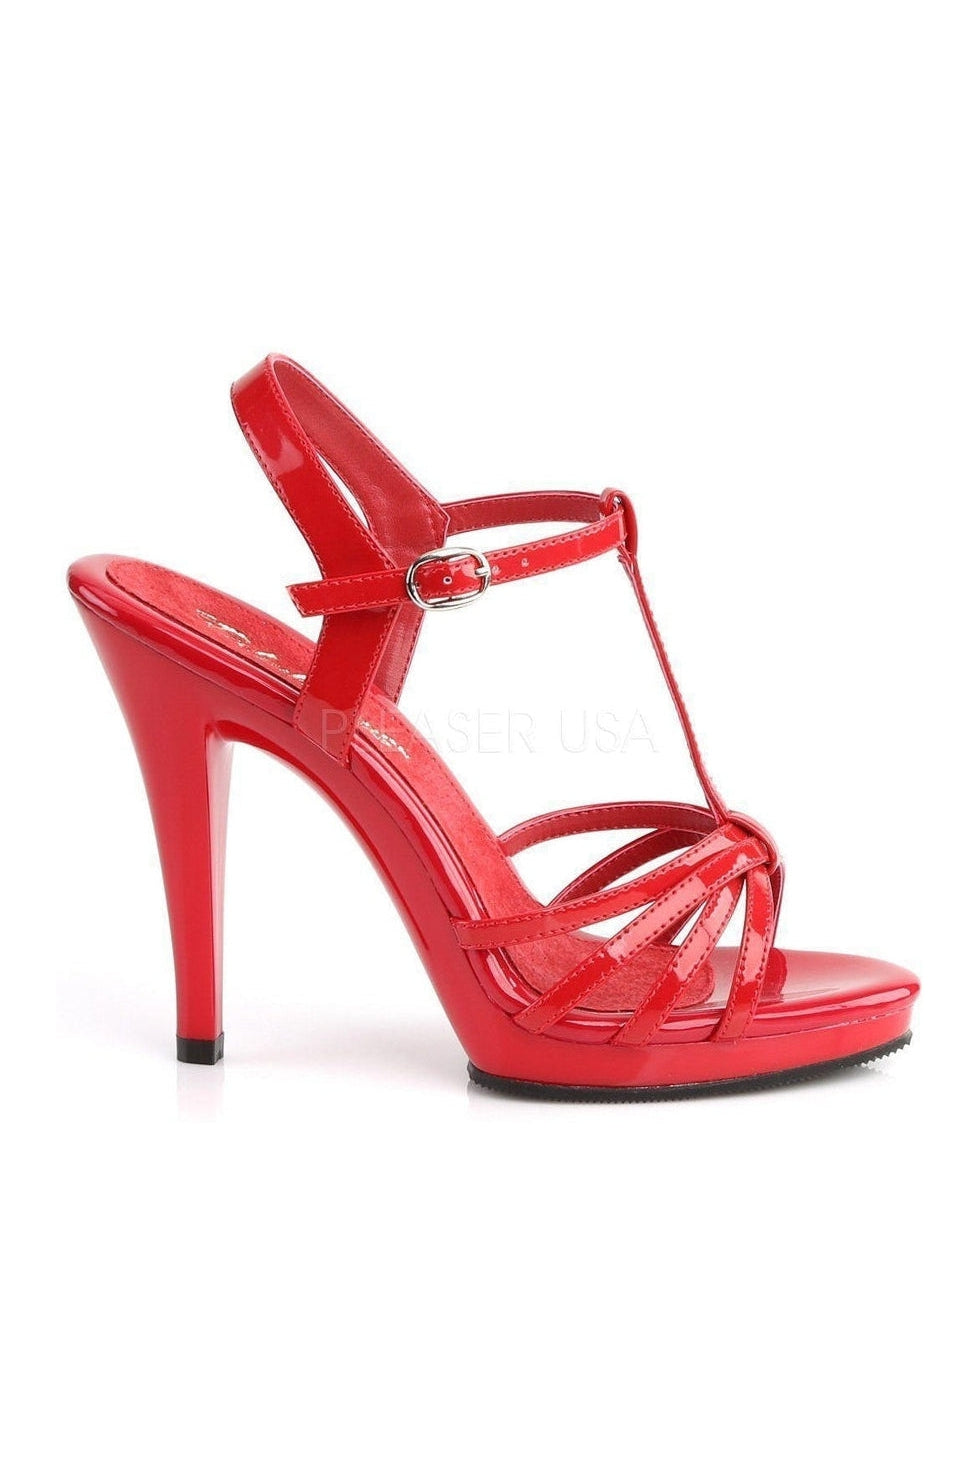 FLAIR-420 Sandal | Red Patent-Fabulicious-Sandals-SEXYSHOES.COM